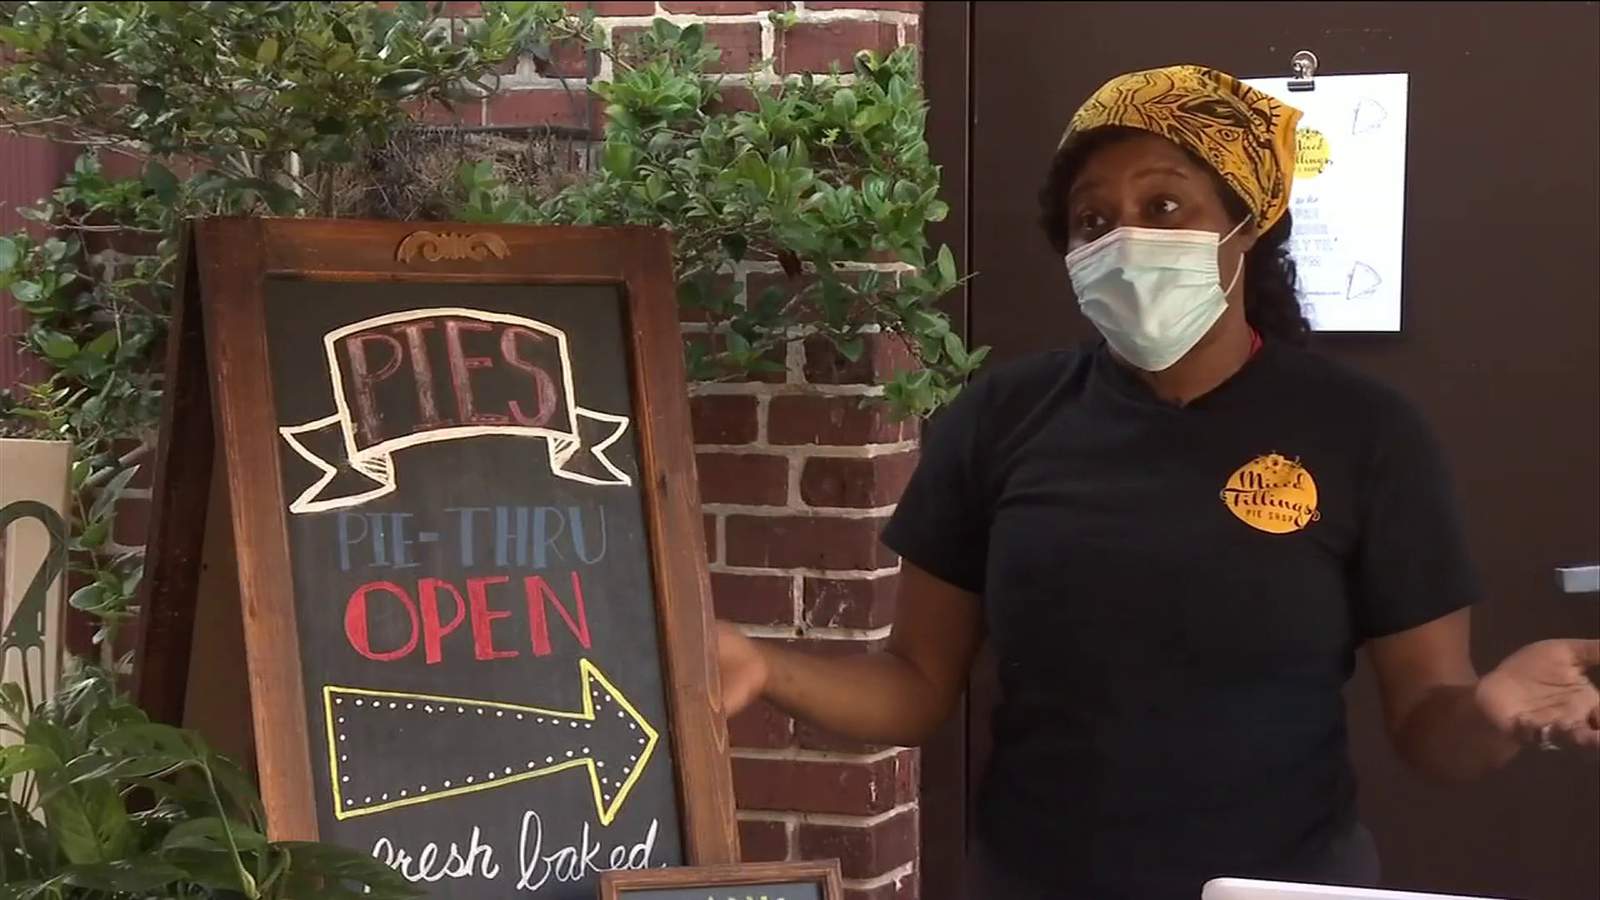 Filling a need: Launching pie shop business during pandemic proves worth the risk